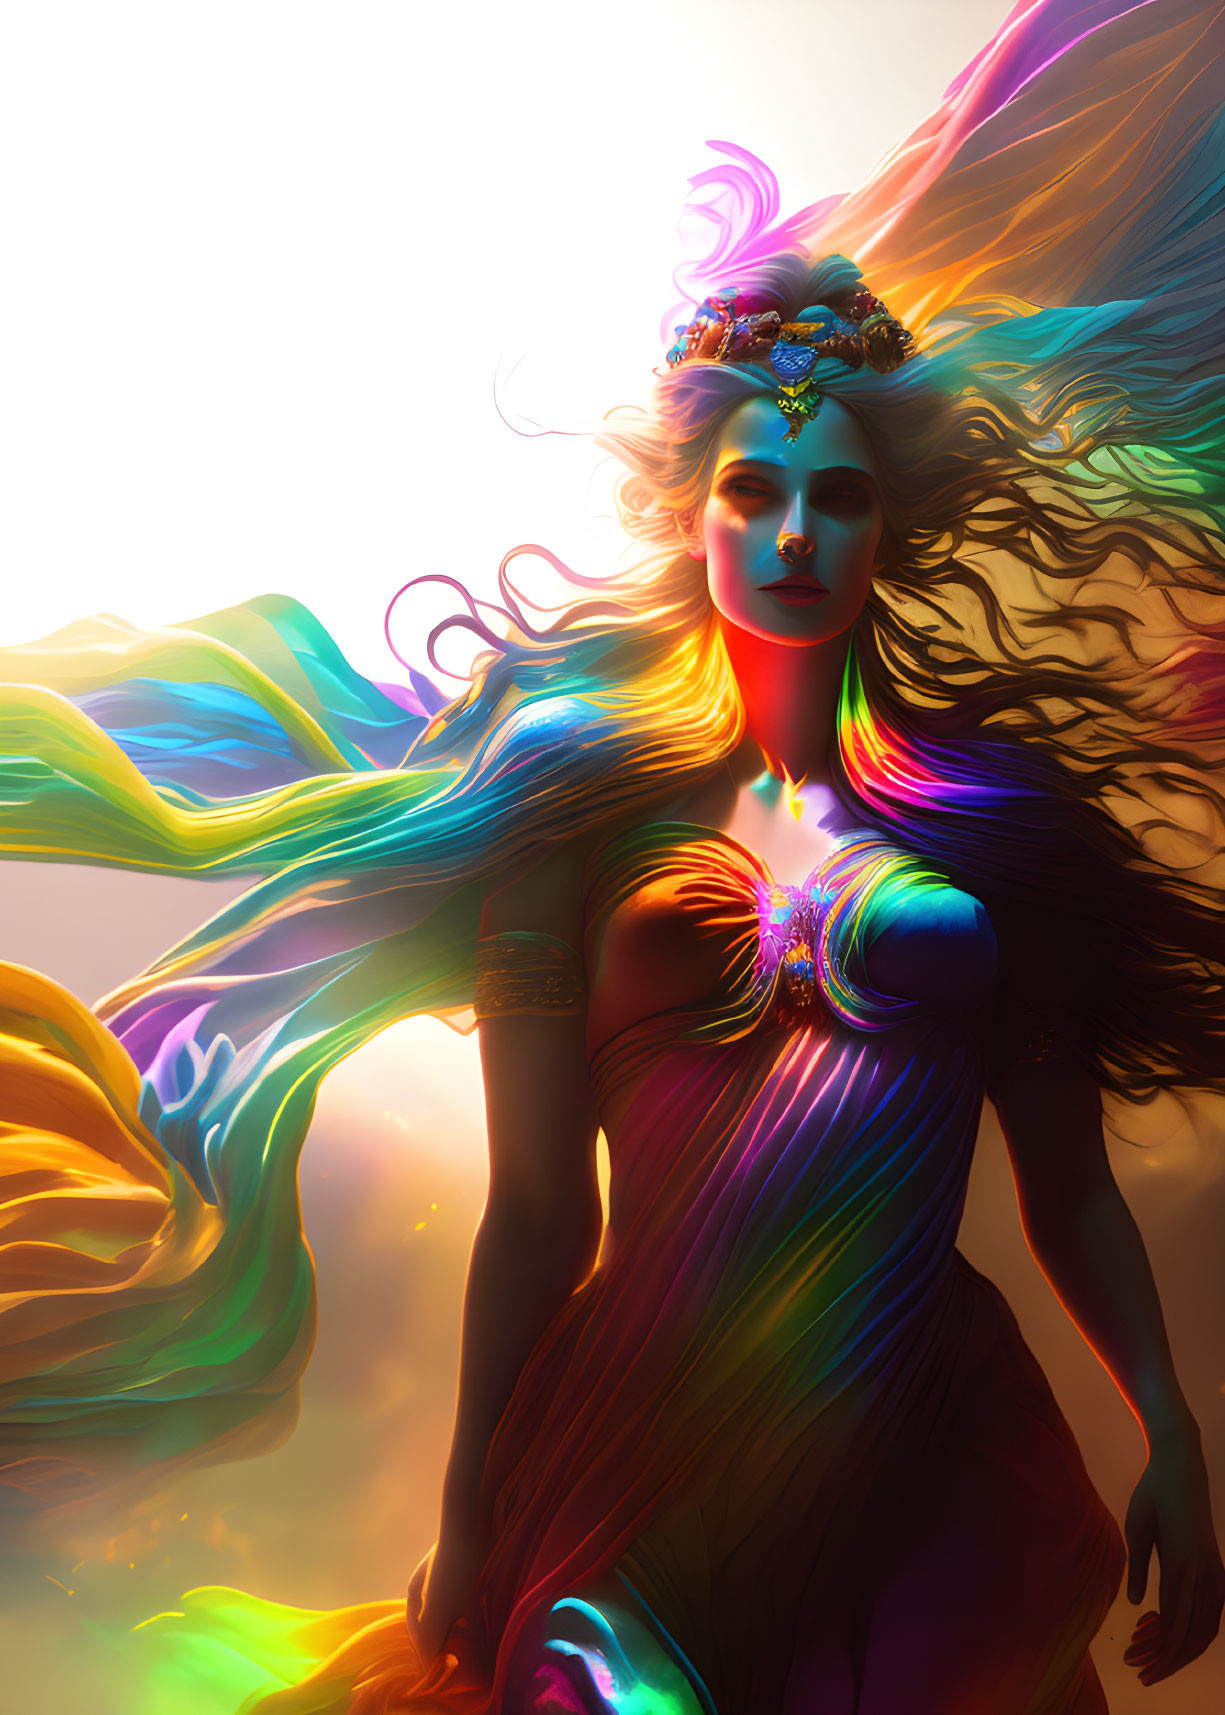 Ethereal woman with colorful flowing hair and radiant attire portrait.